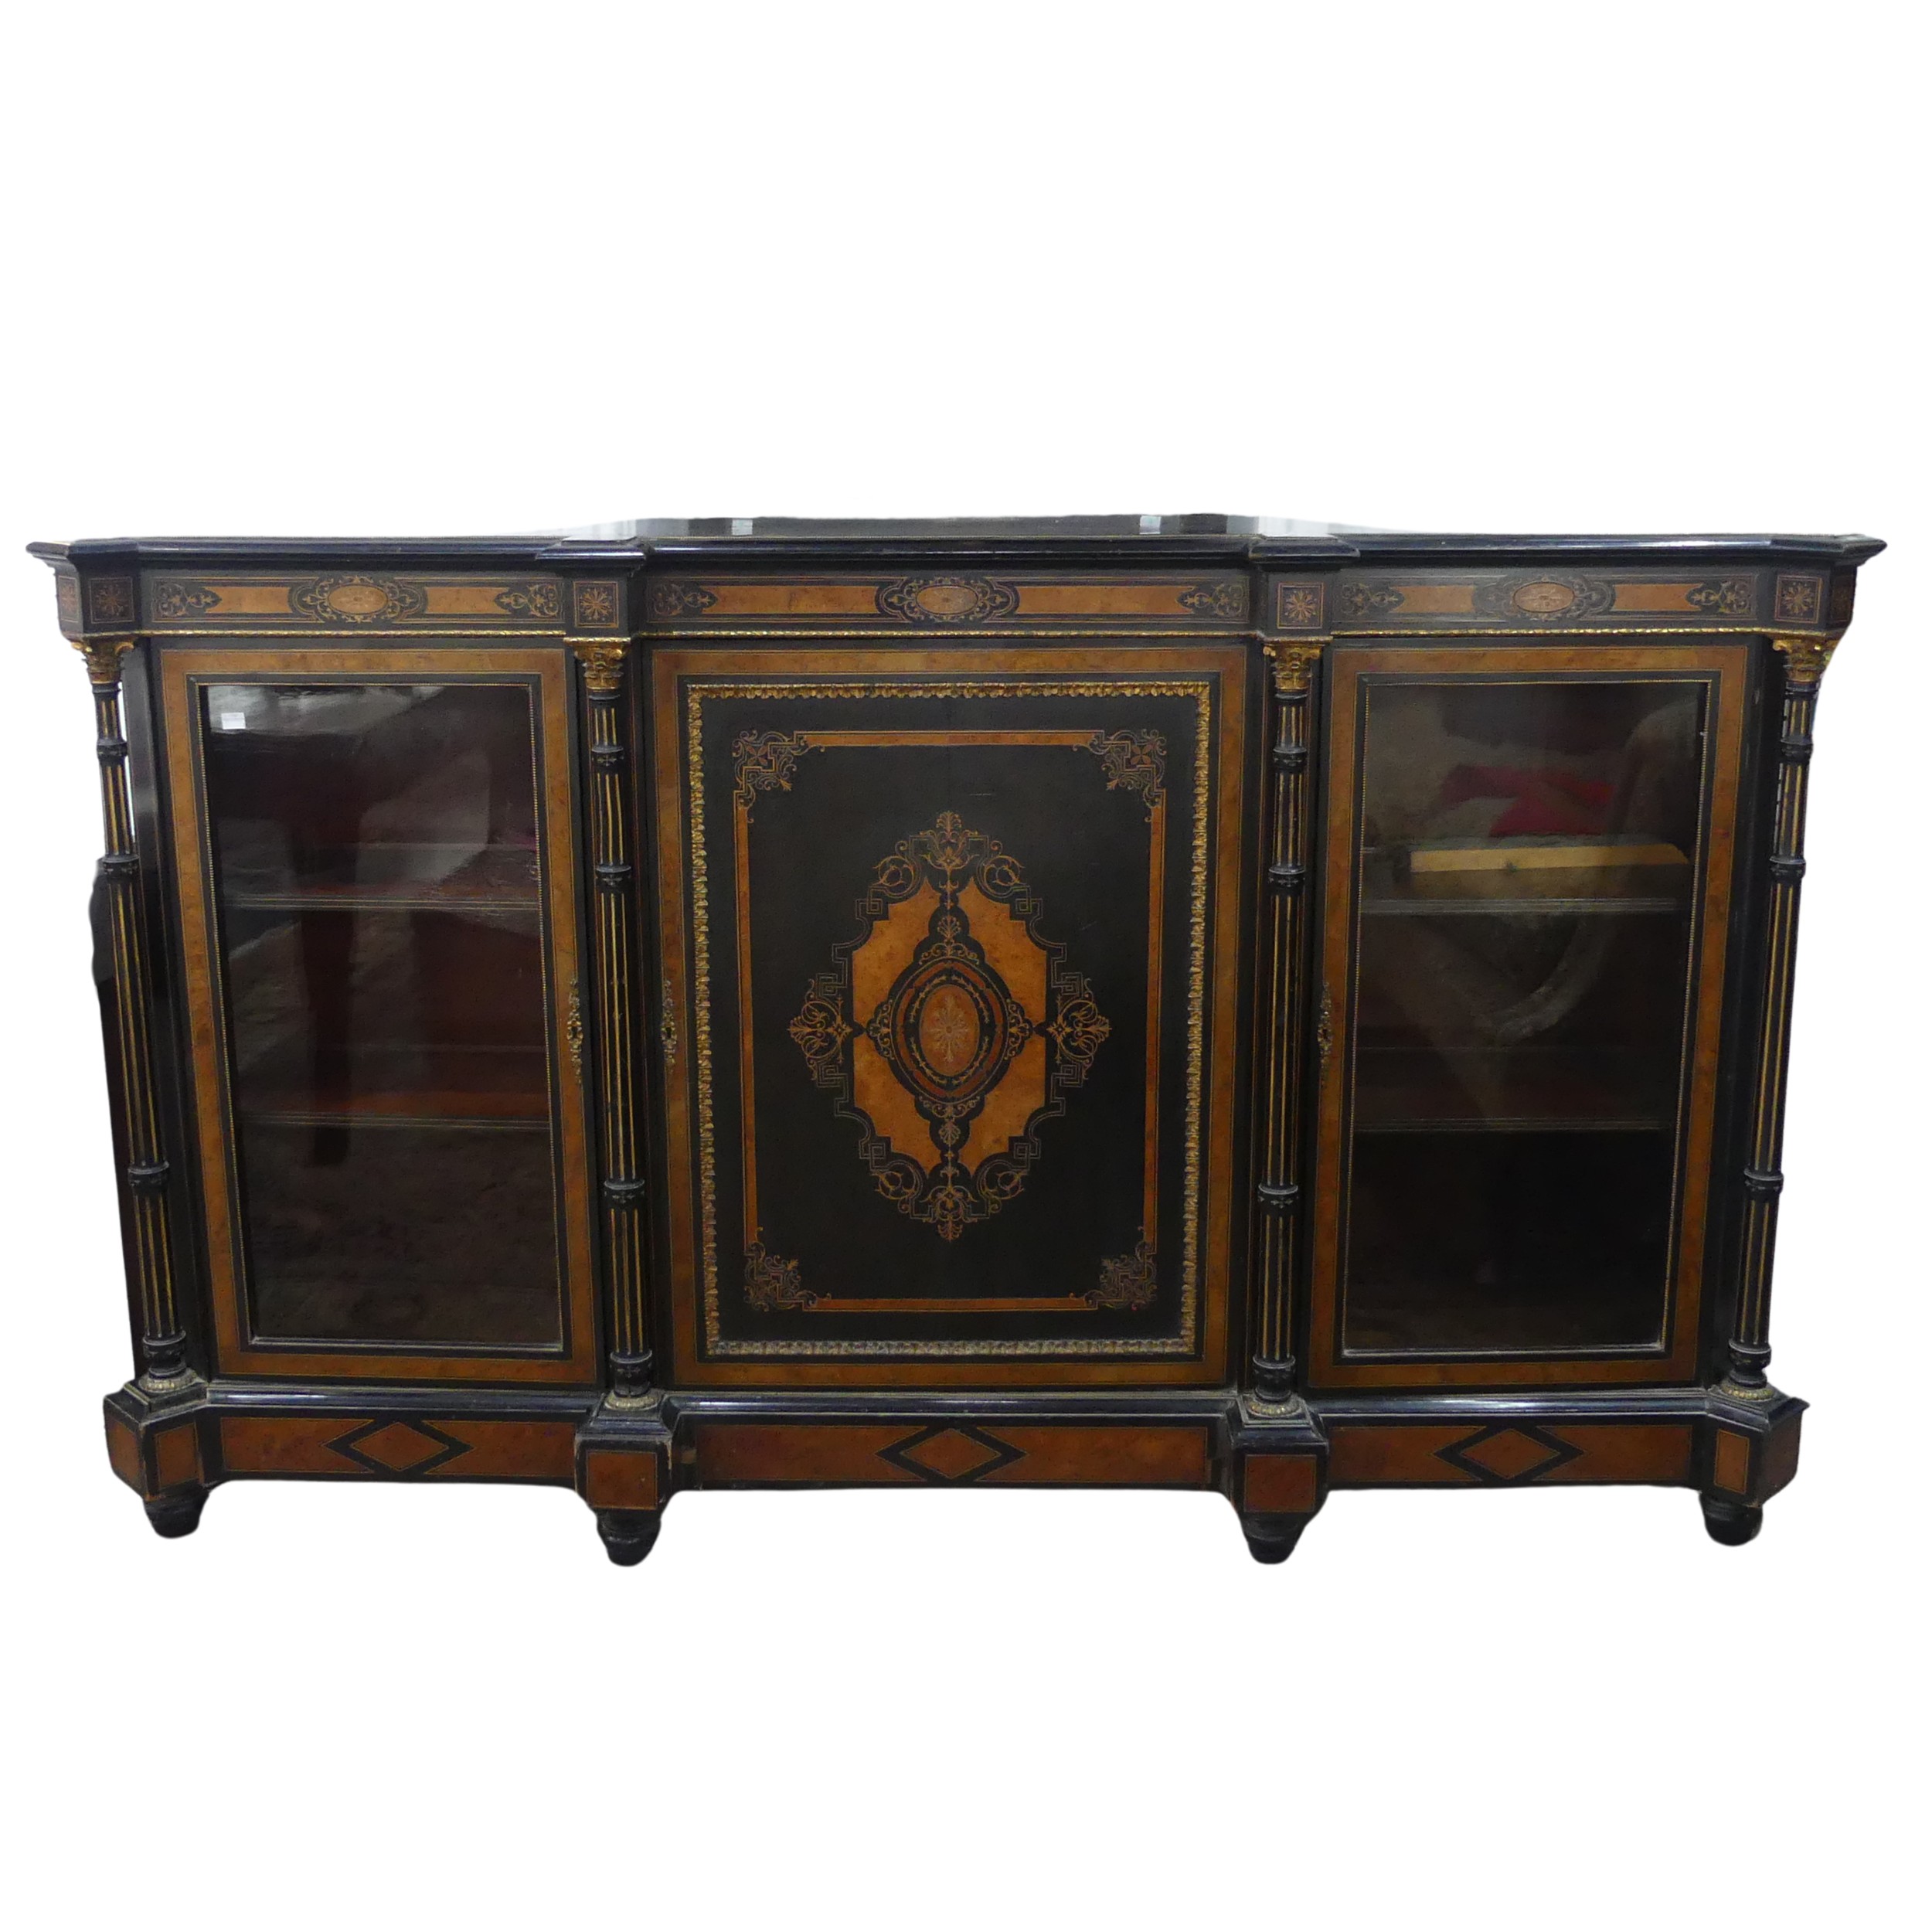 A good Victorian ebonised, marquetry and walnut banded breakfront Credenza, shaped top above